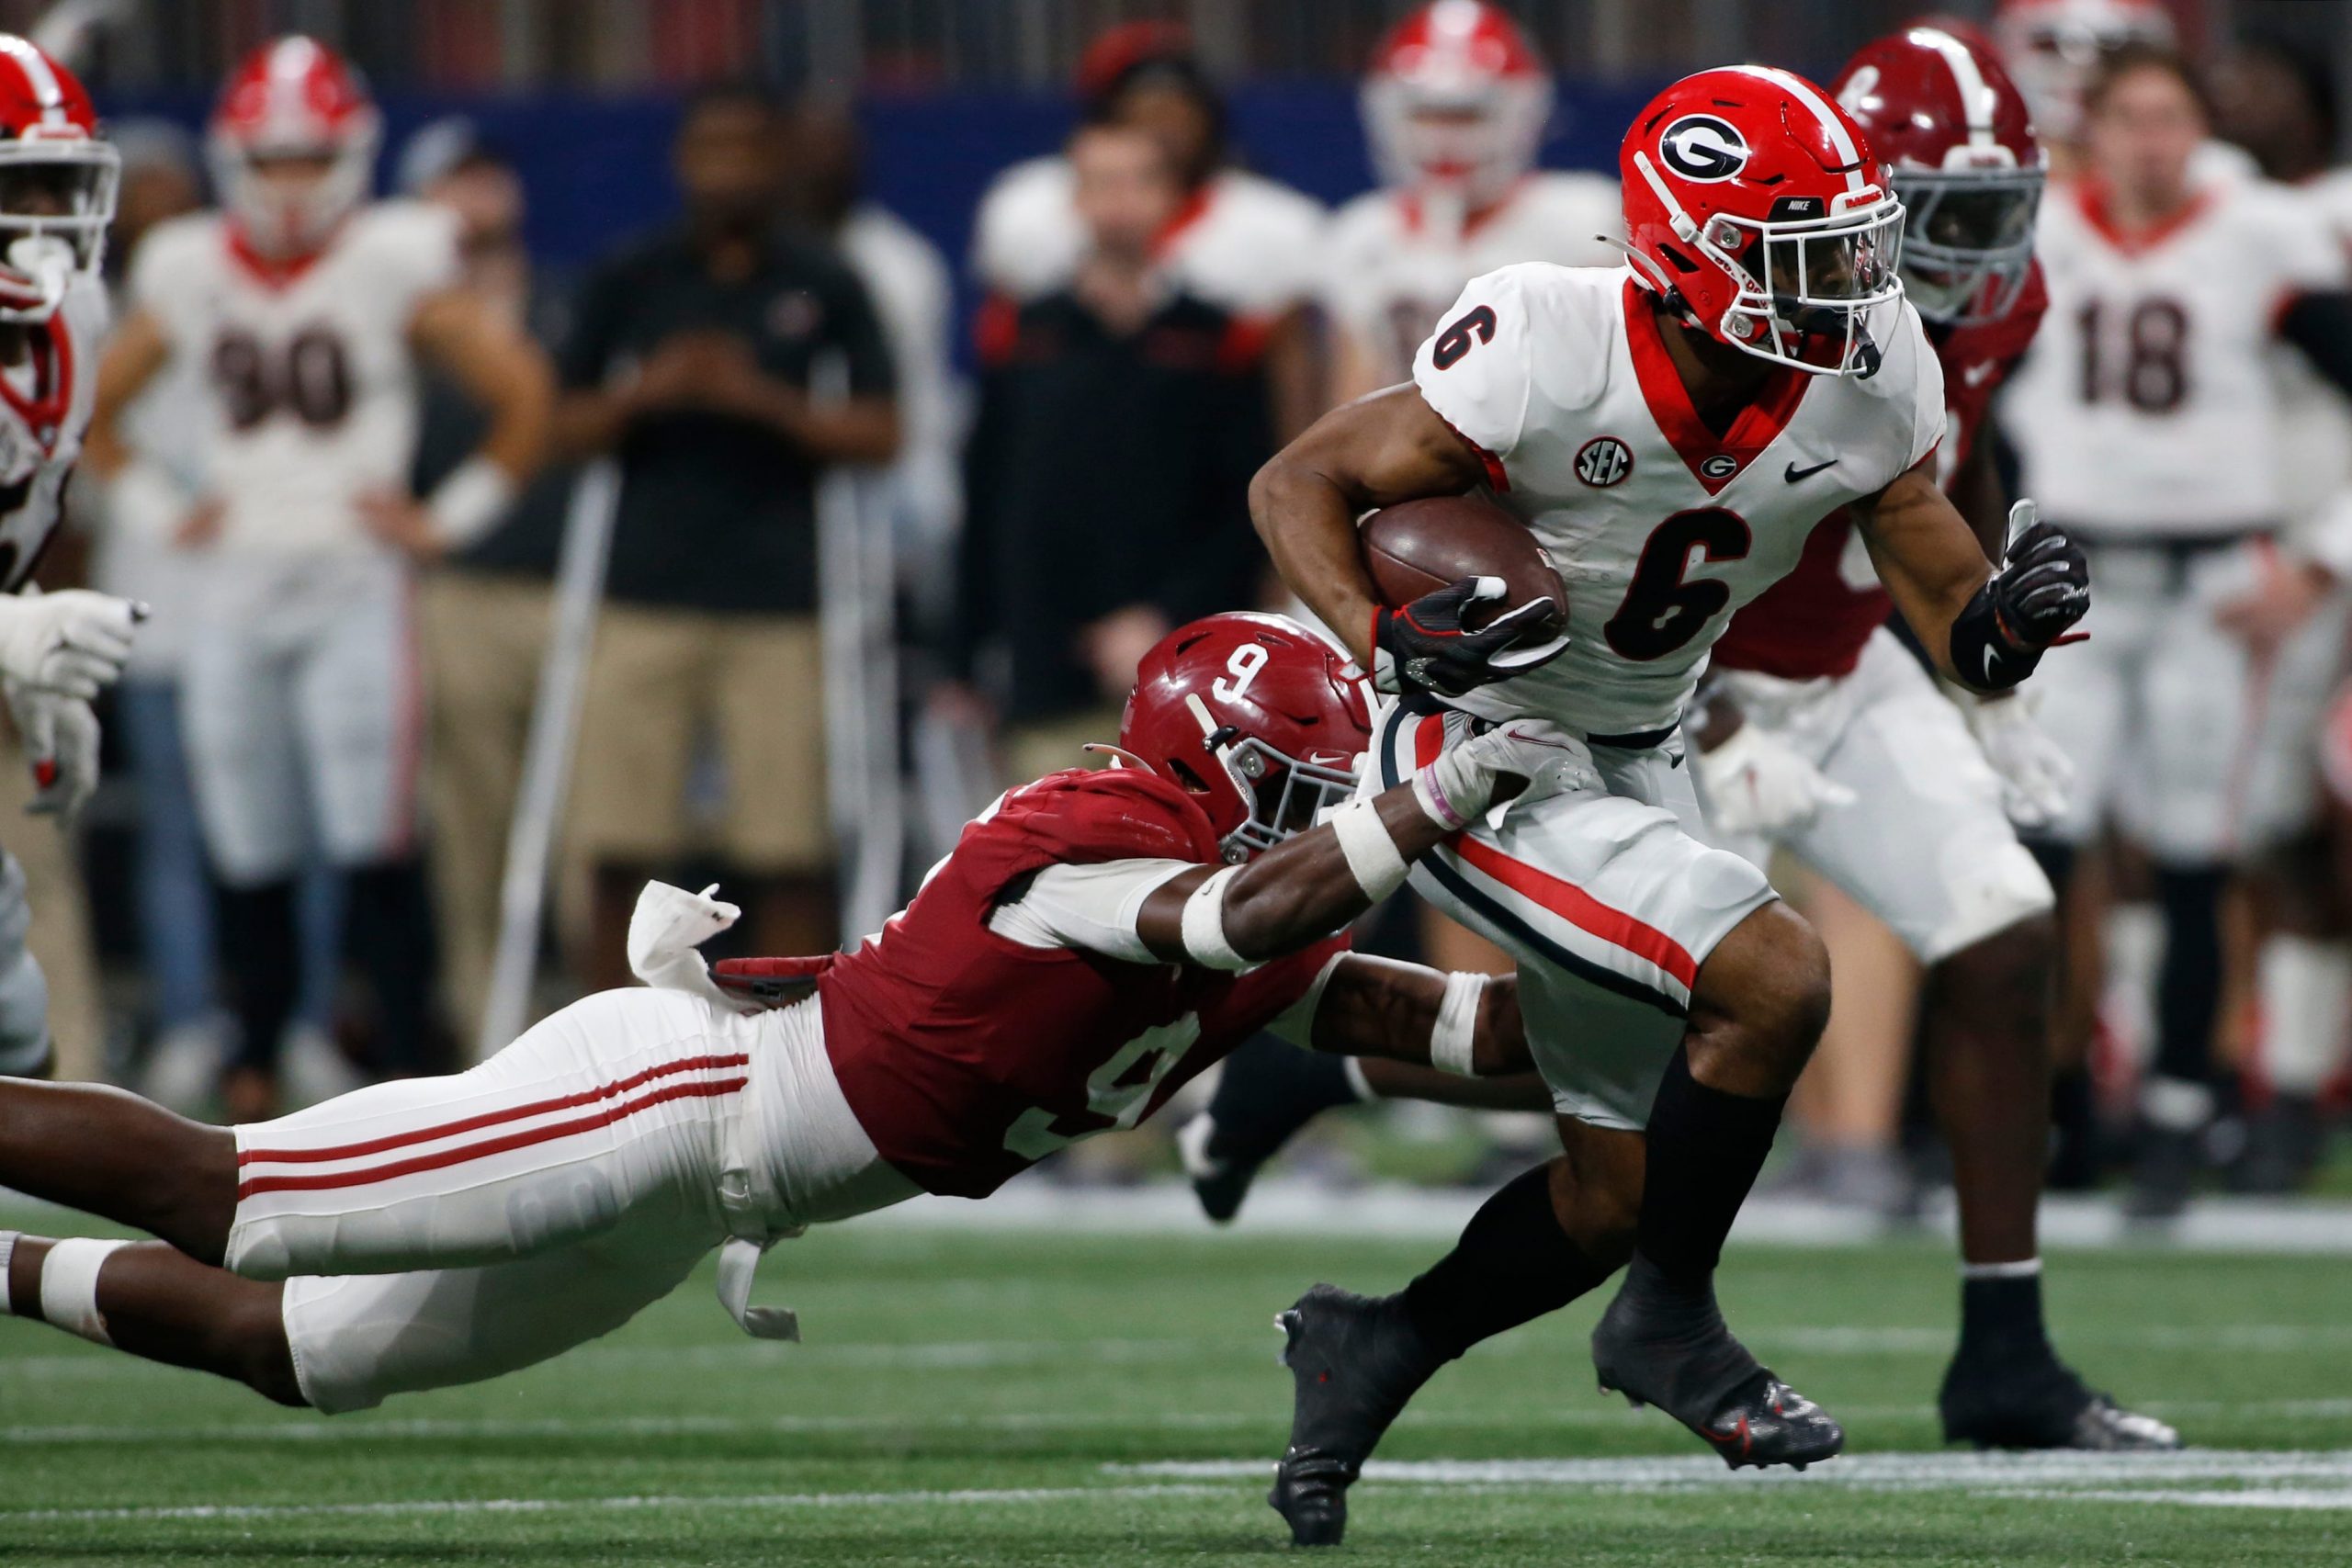 Georgia running back Kenny McIntosh (6) breaks away from Alabama defensive back Jordan Battle (9) during the second half of the Southeastern Conference championship NCAA college football game between Georgia and Alabama in Atlanta, on Saturday, Dec. 4, 2021